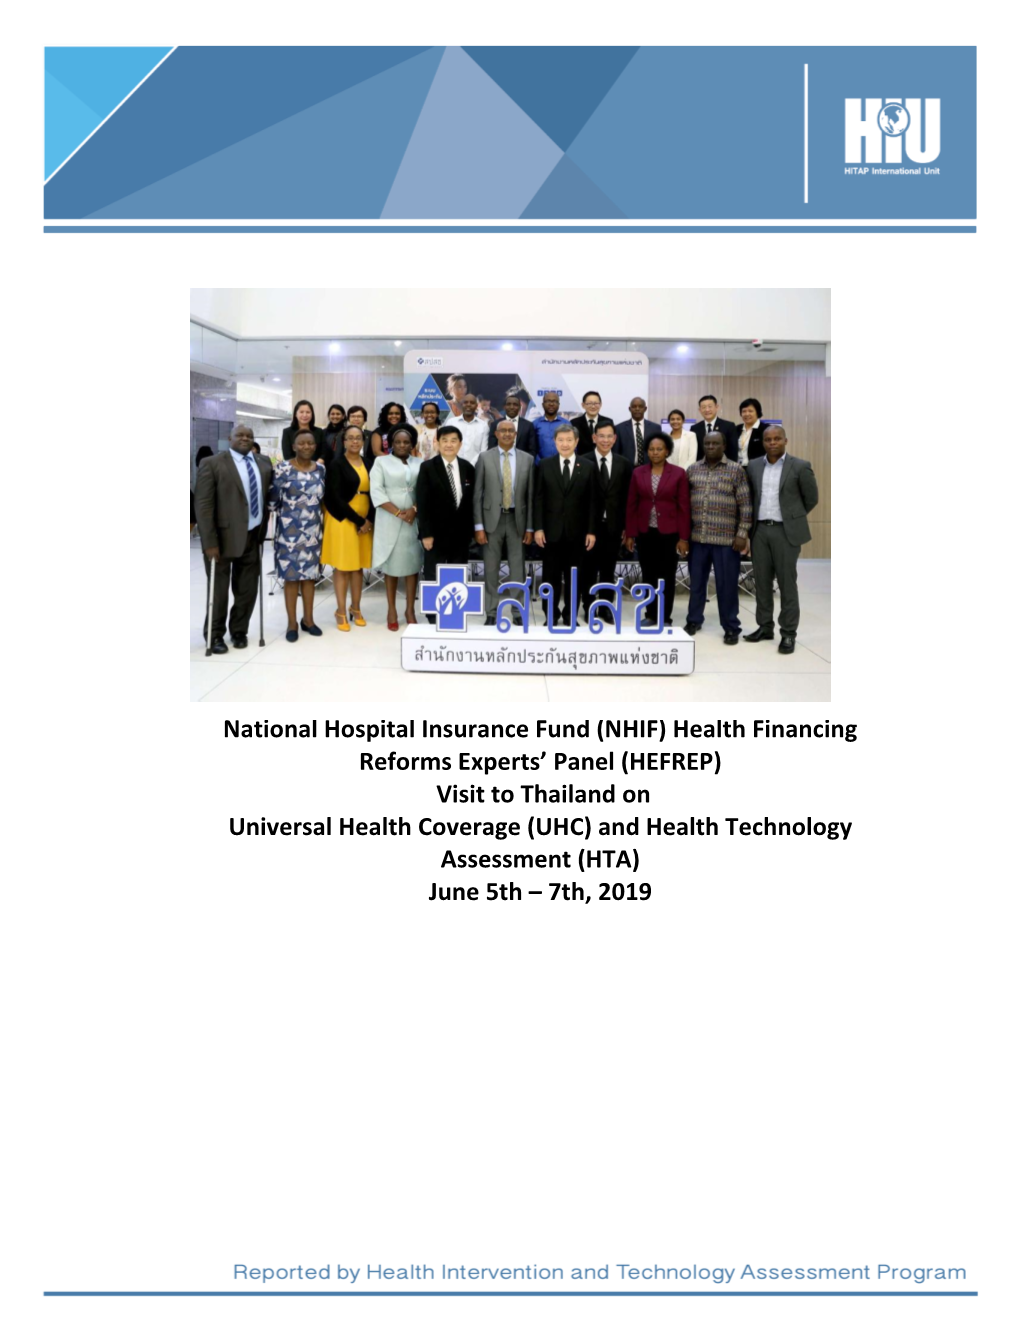 NHIF) Health Financing Reforms Experts' Panel (HEFREP